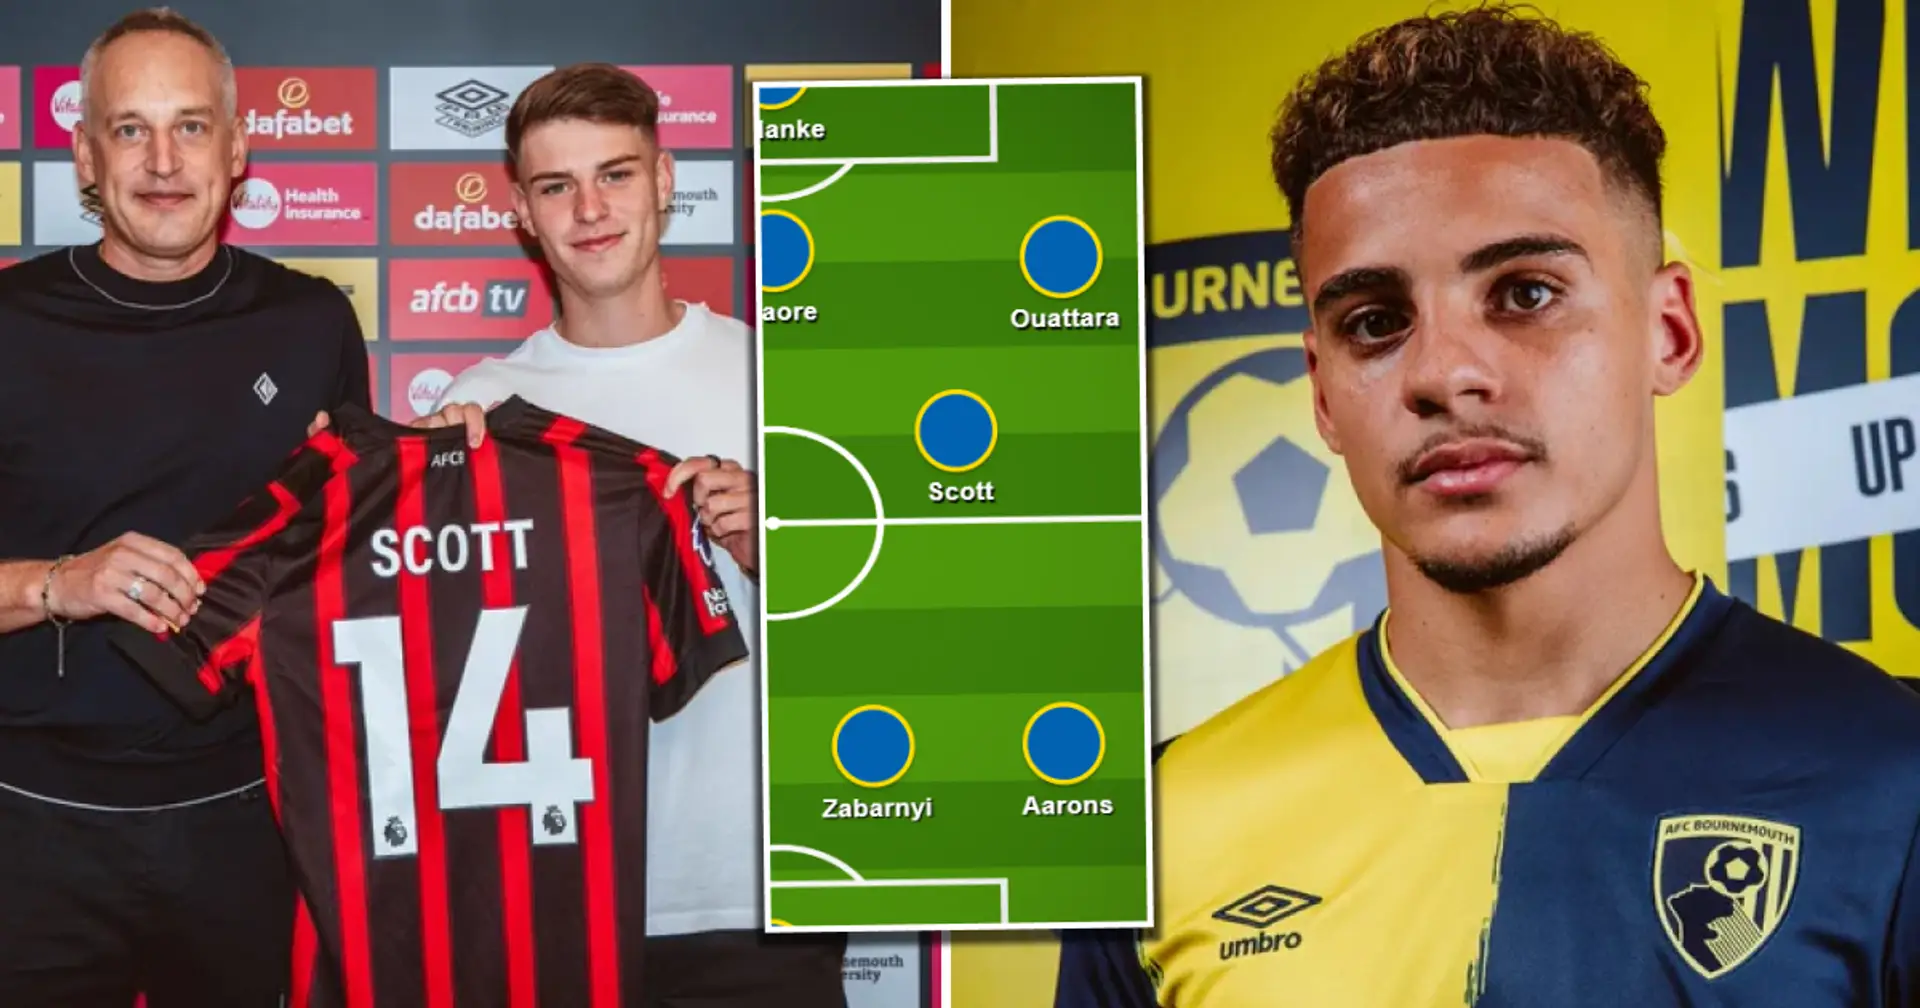 Europa League contenders? Bournemouth's £170m starting XI this season shown in lineup